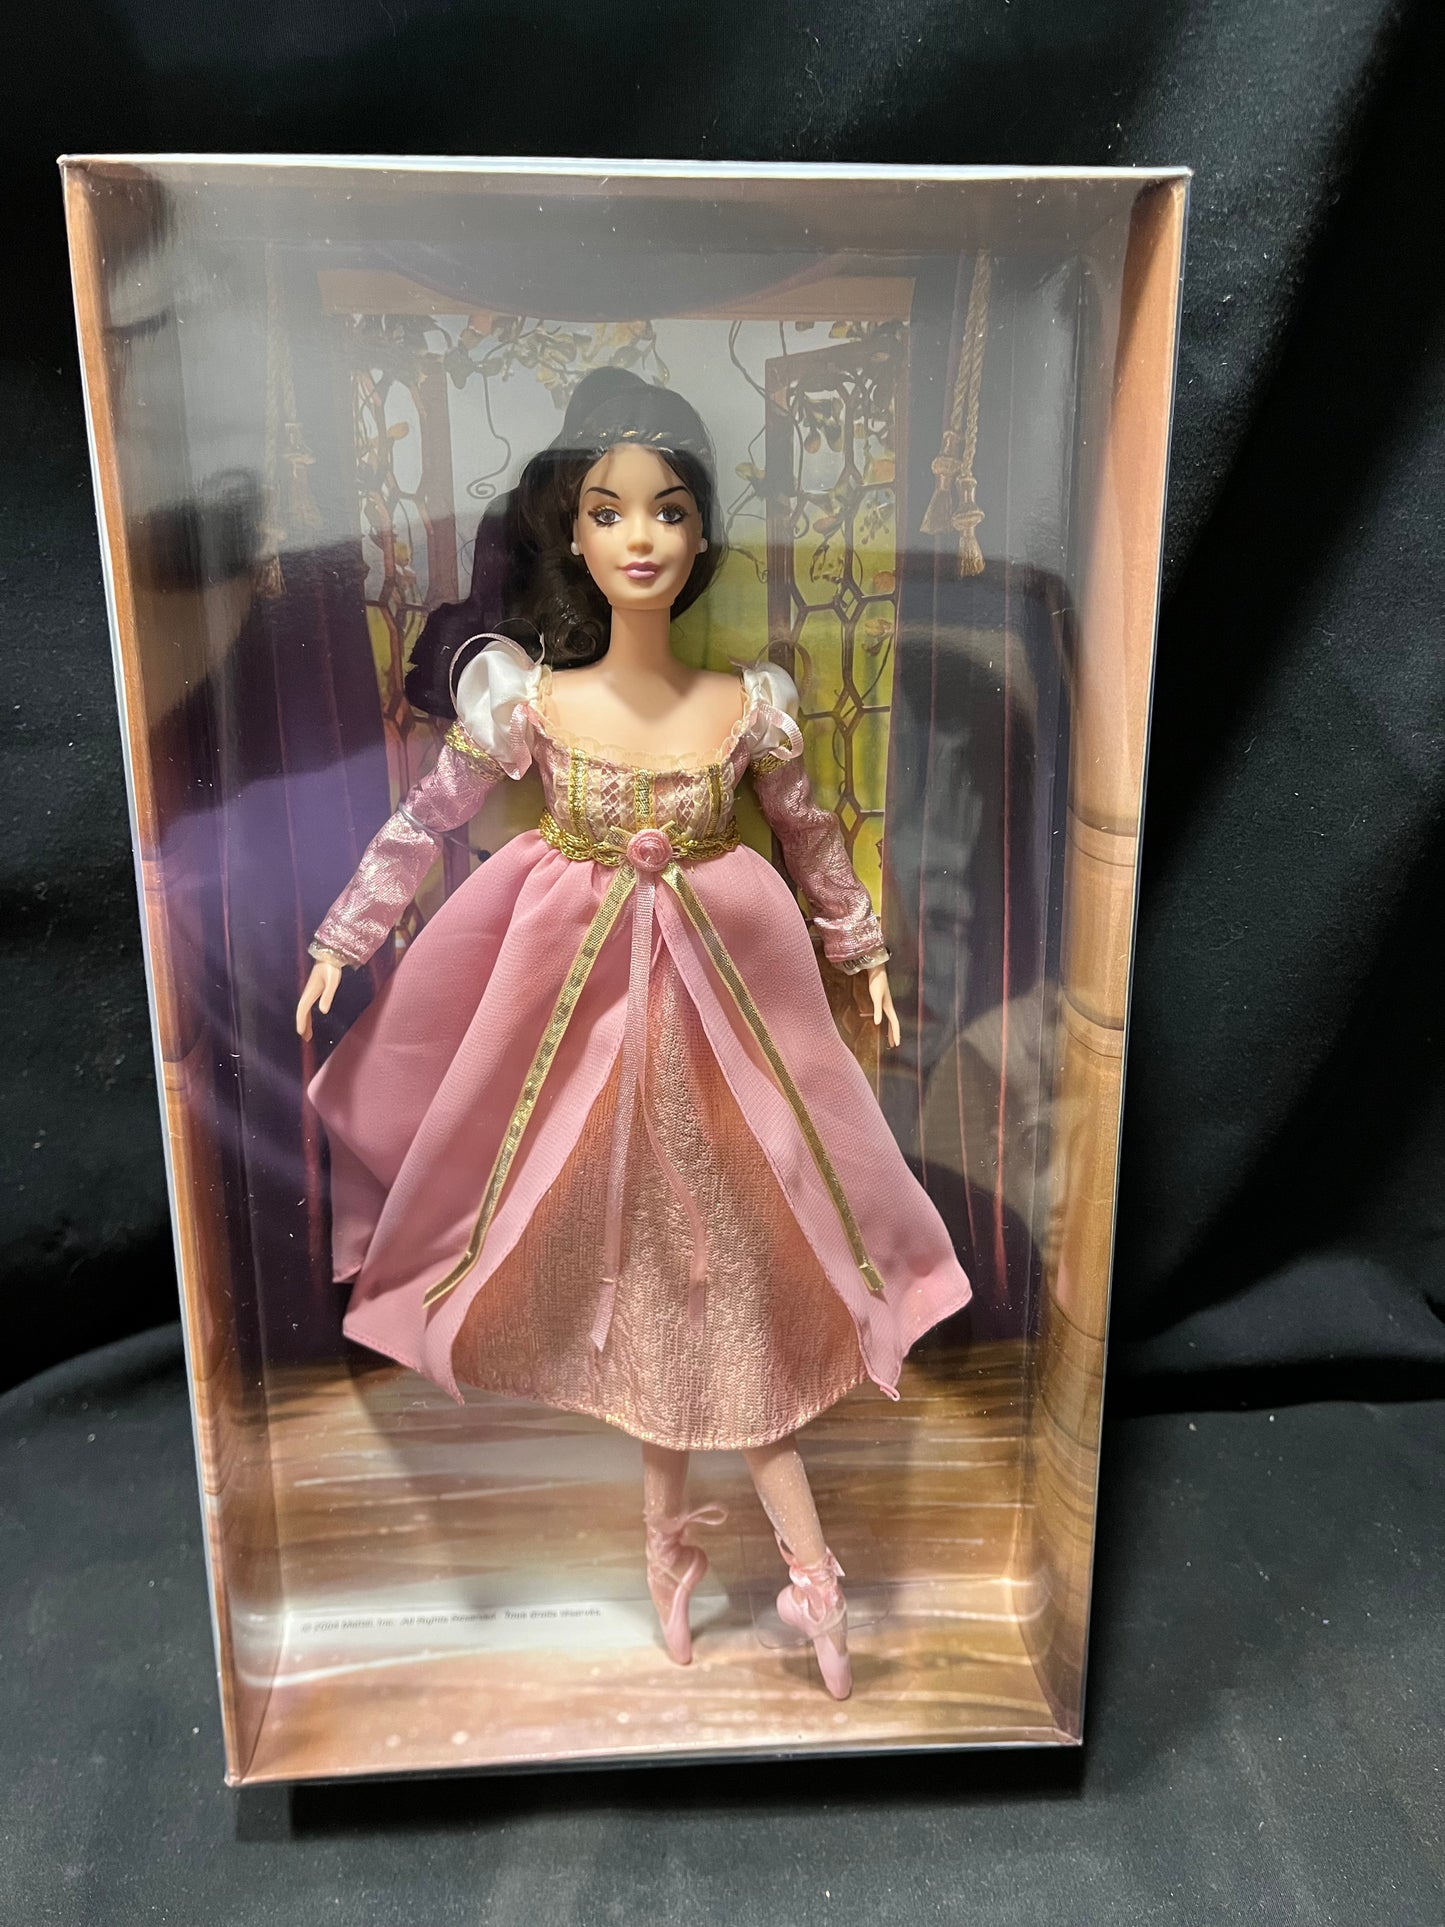 Barbie as Juliet from the ballet "Romeo and Juliet" Silver Label Collectible Barbie Doll